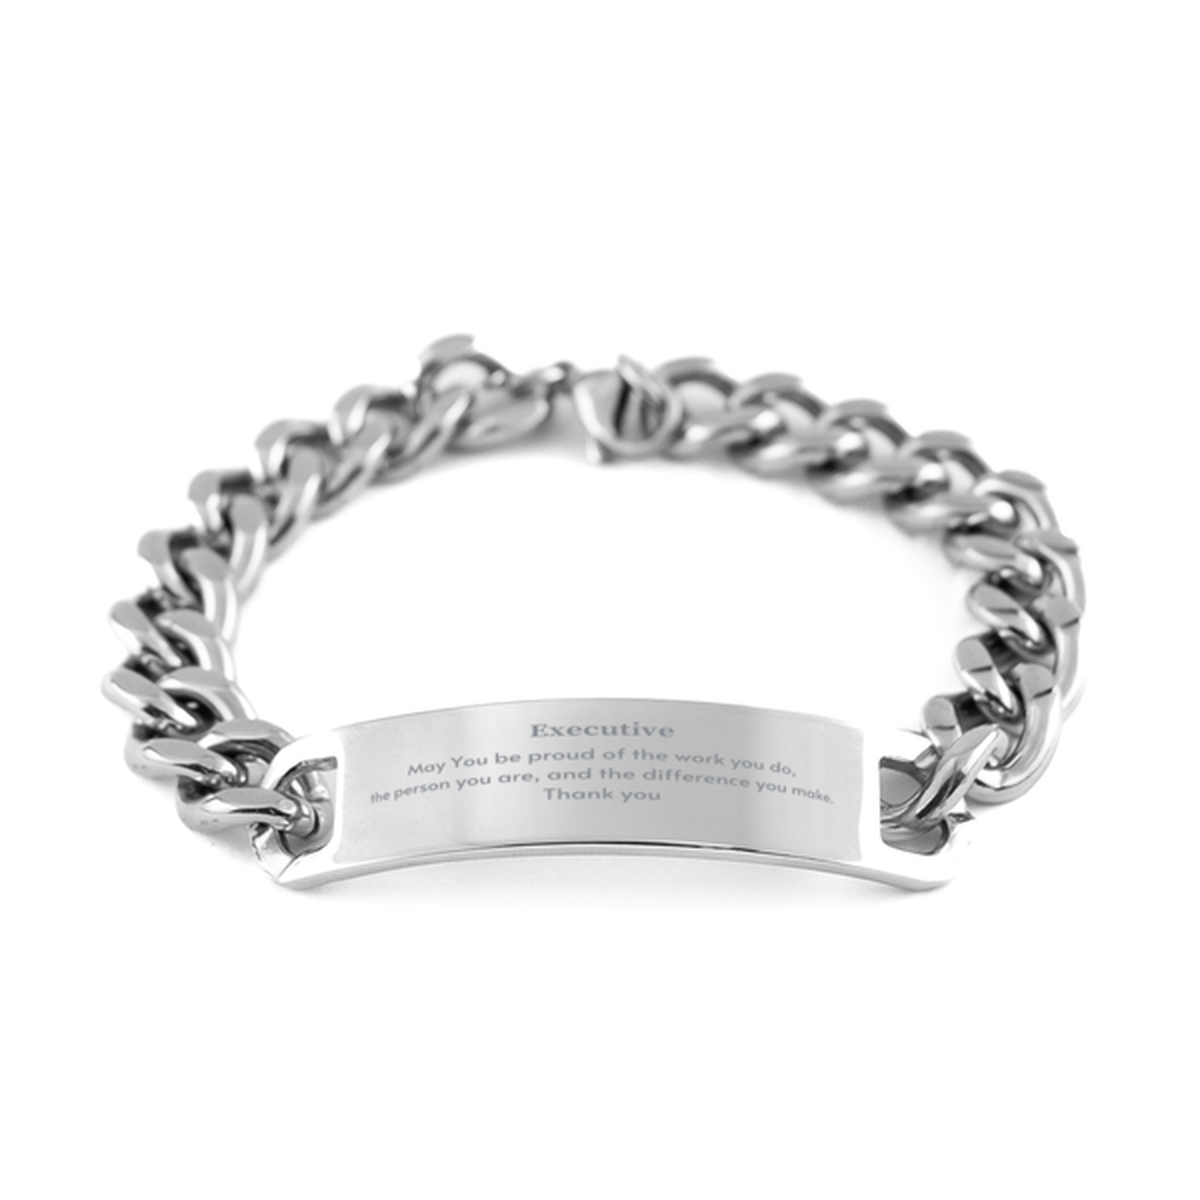 Heartwarming Cuban Chain Stainless Steel Bracelet Retirement Coworkers Gifts for Executive, Executive May You be proud of the work you do, the person you are Gifts for Boss Men Women Friends